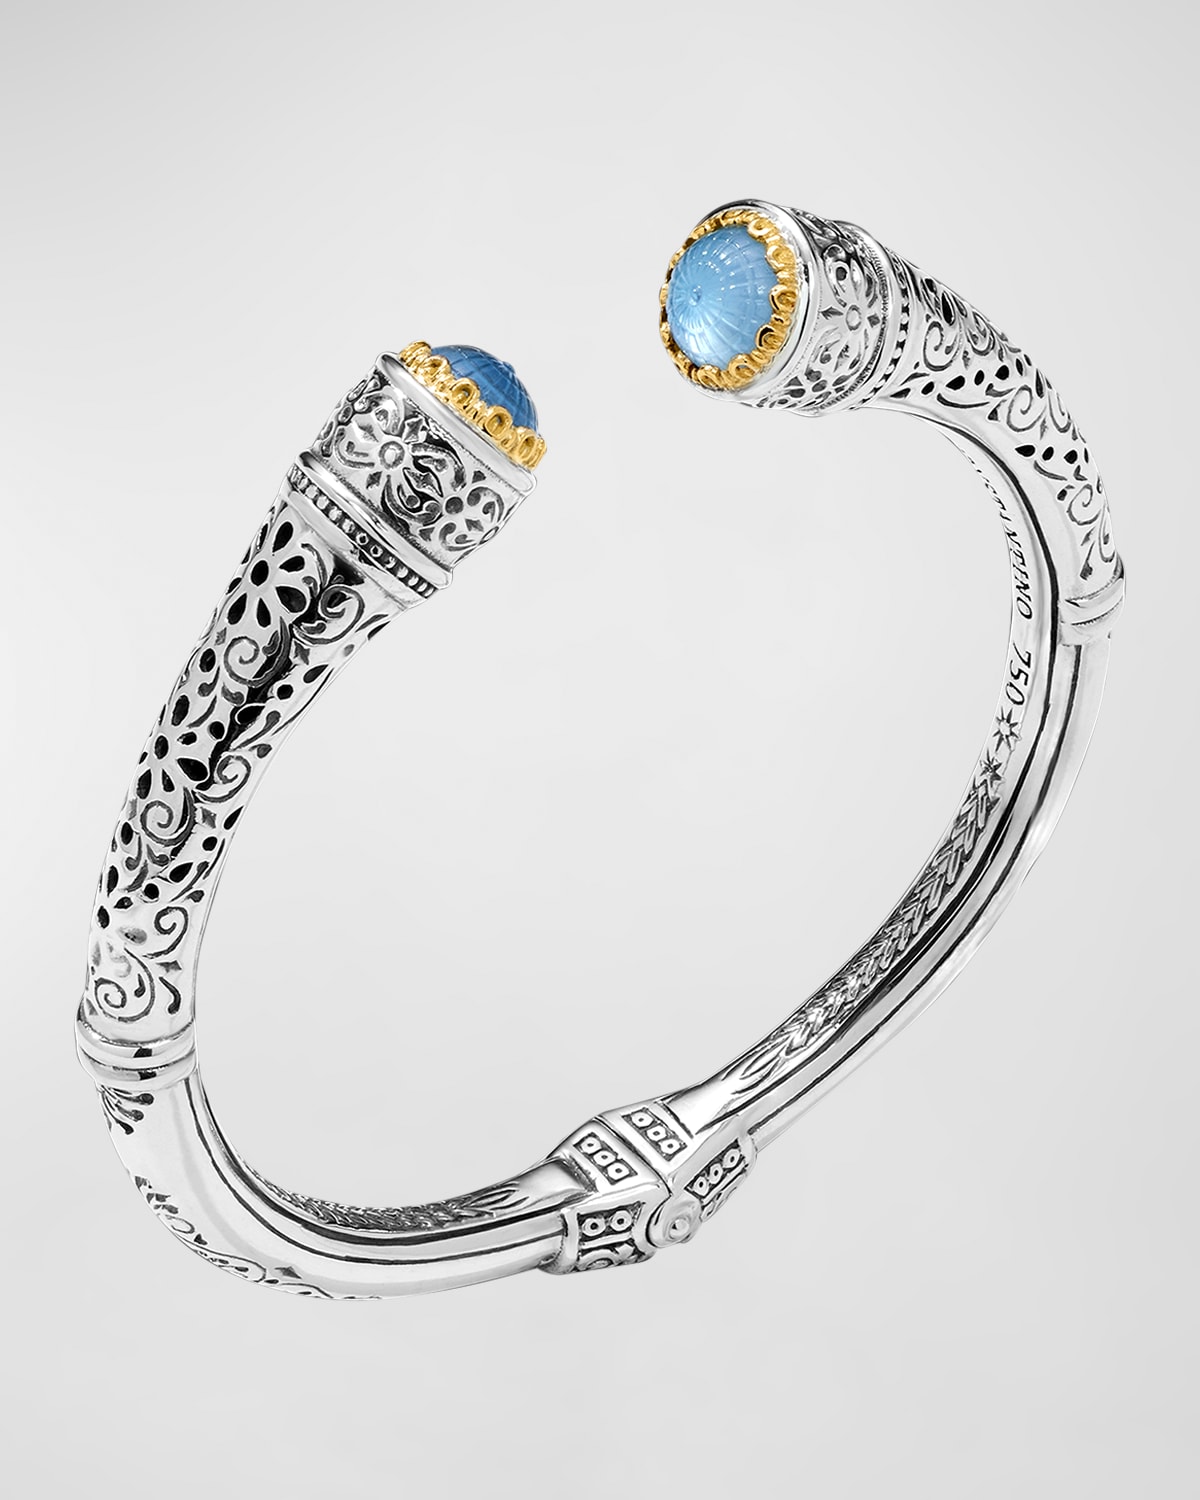 KONSTANTINO DOME BLUE SPINEL AND MOTHER-OF-PEARL DOUBLET BRACELET